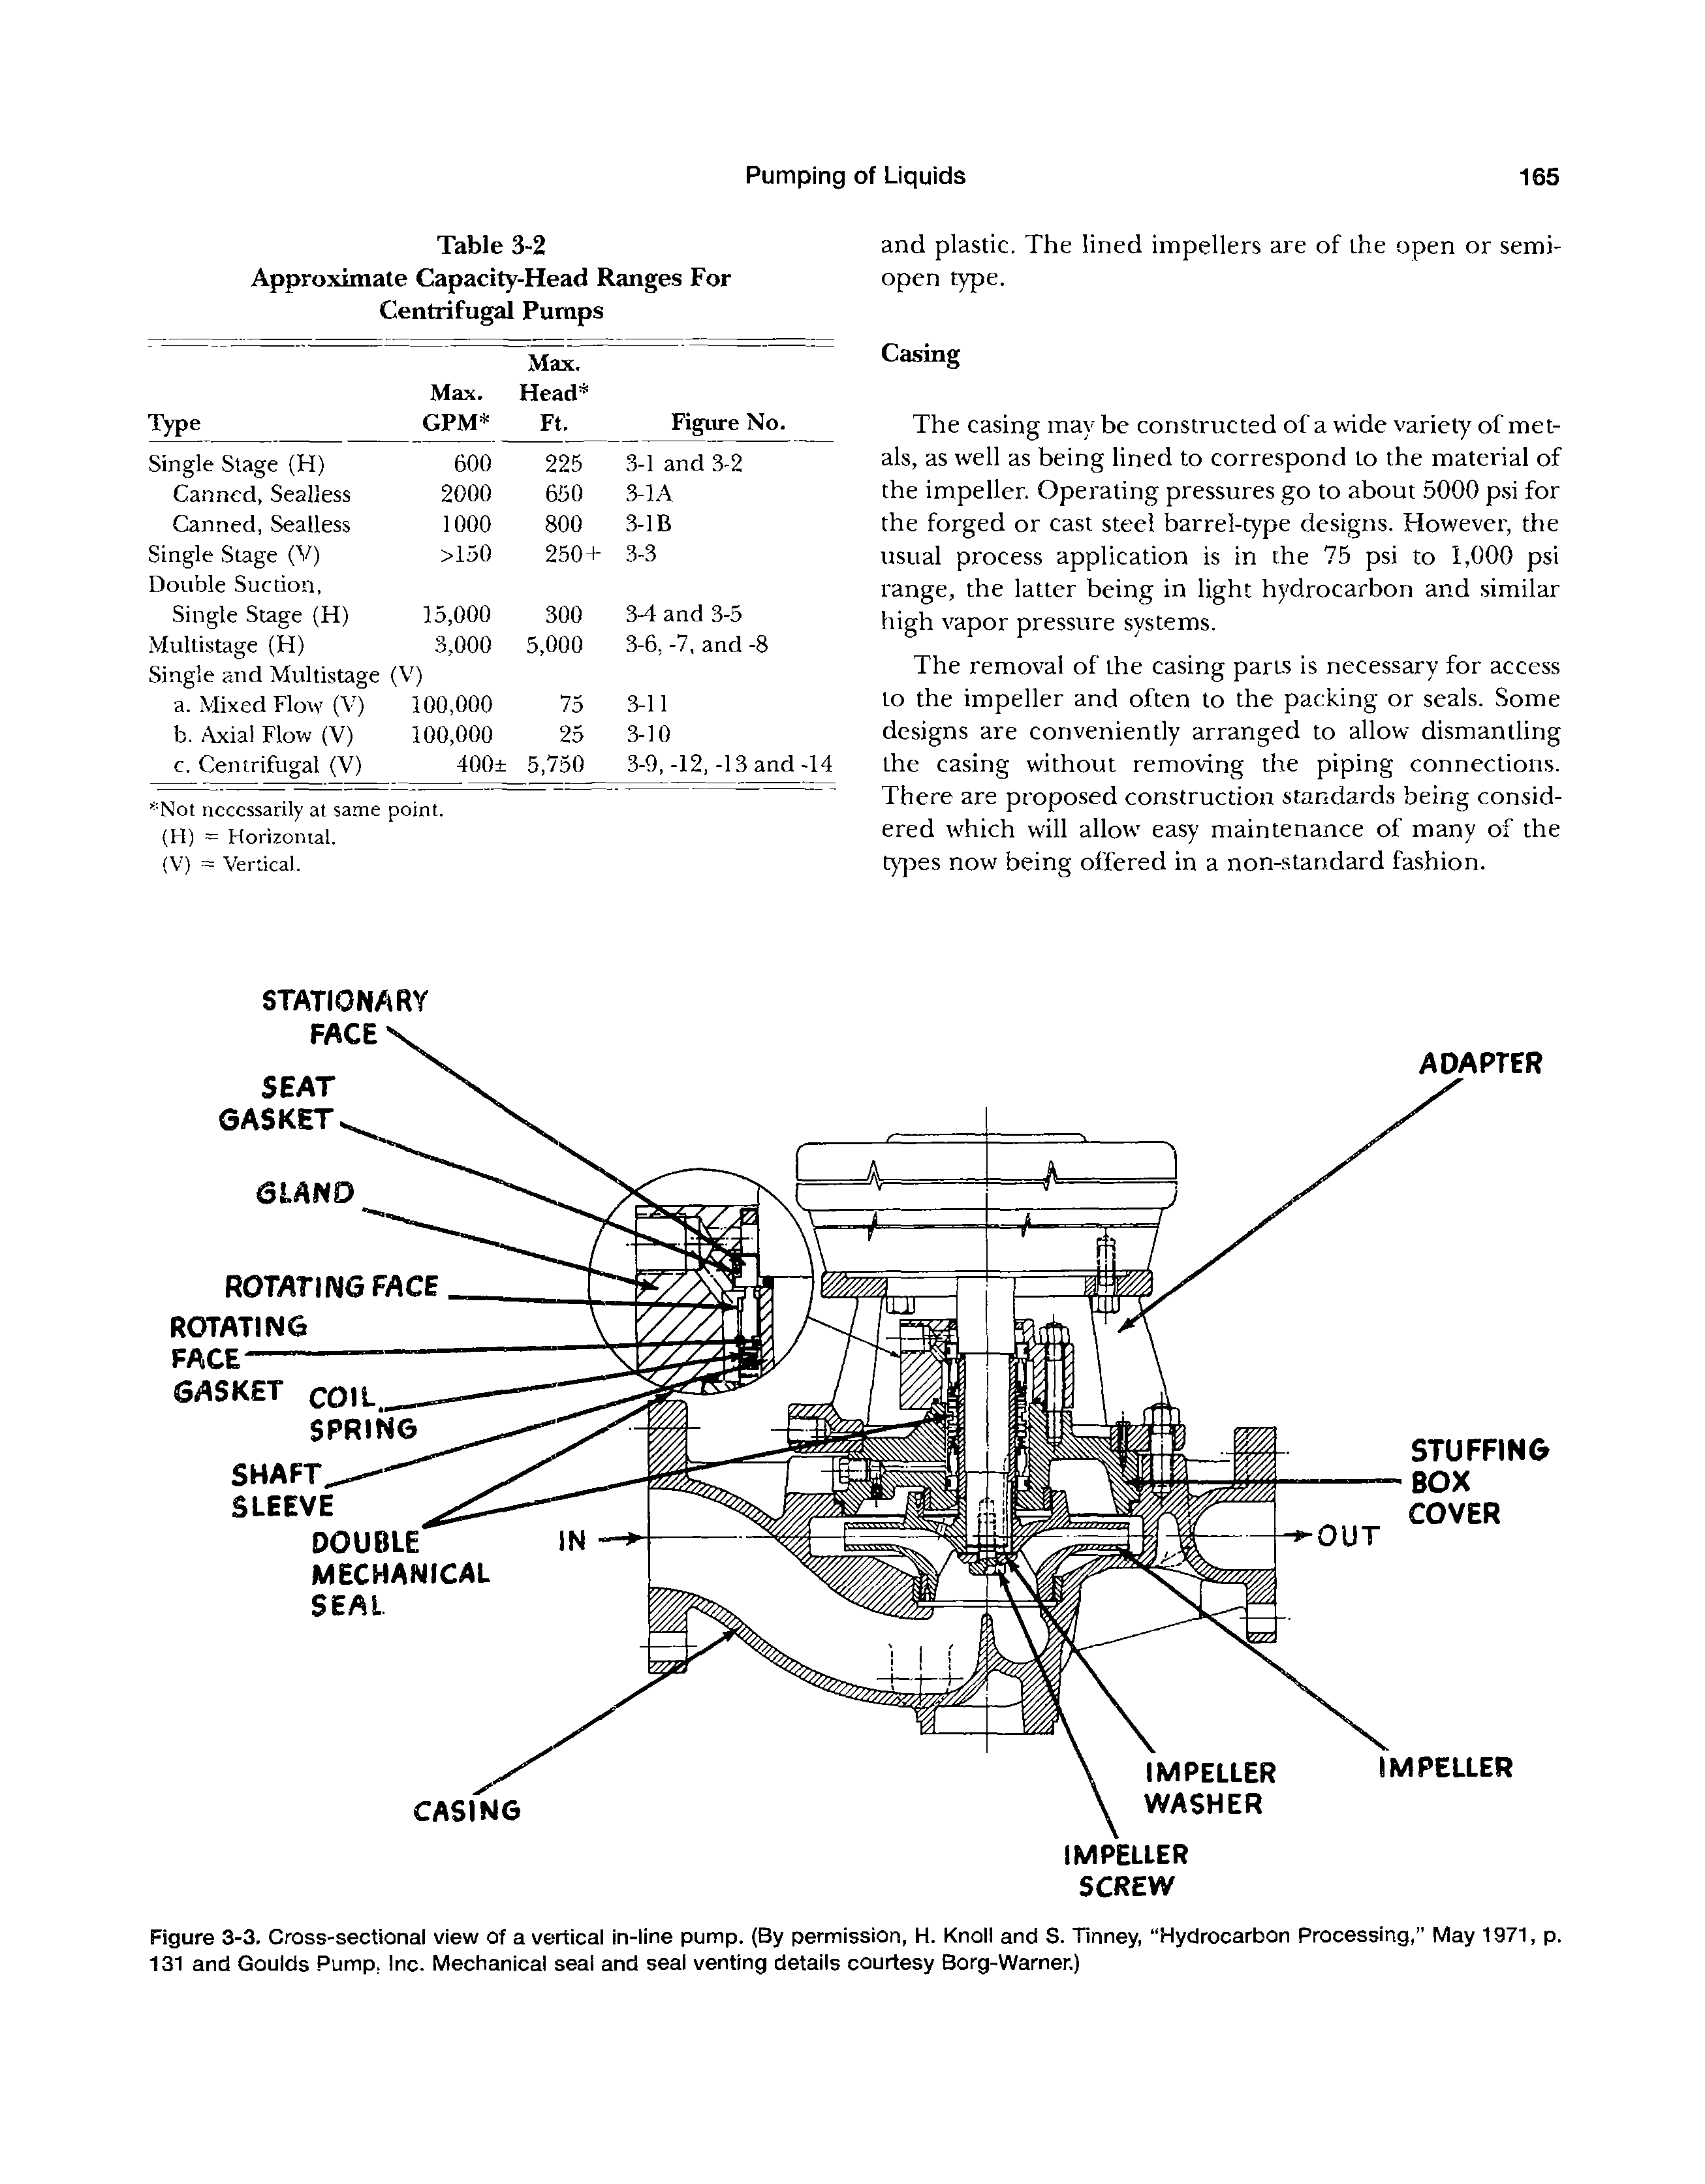 Figure 3-3. Cross-sectional view of a vertical in-line pump. (By permission, H. Knoll and S. Tinney, Hydrocarbon Processing," May 1971, p. 131 and Goulds Pump, Inc. Mechanical seal and seal venting details courtesy Borg-Warner.)...